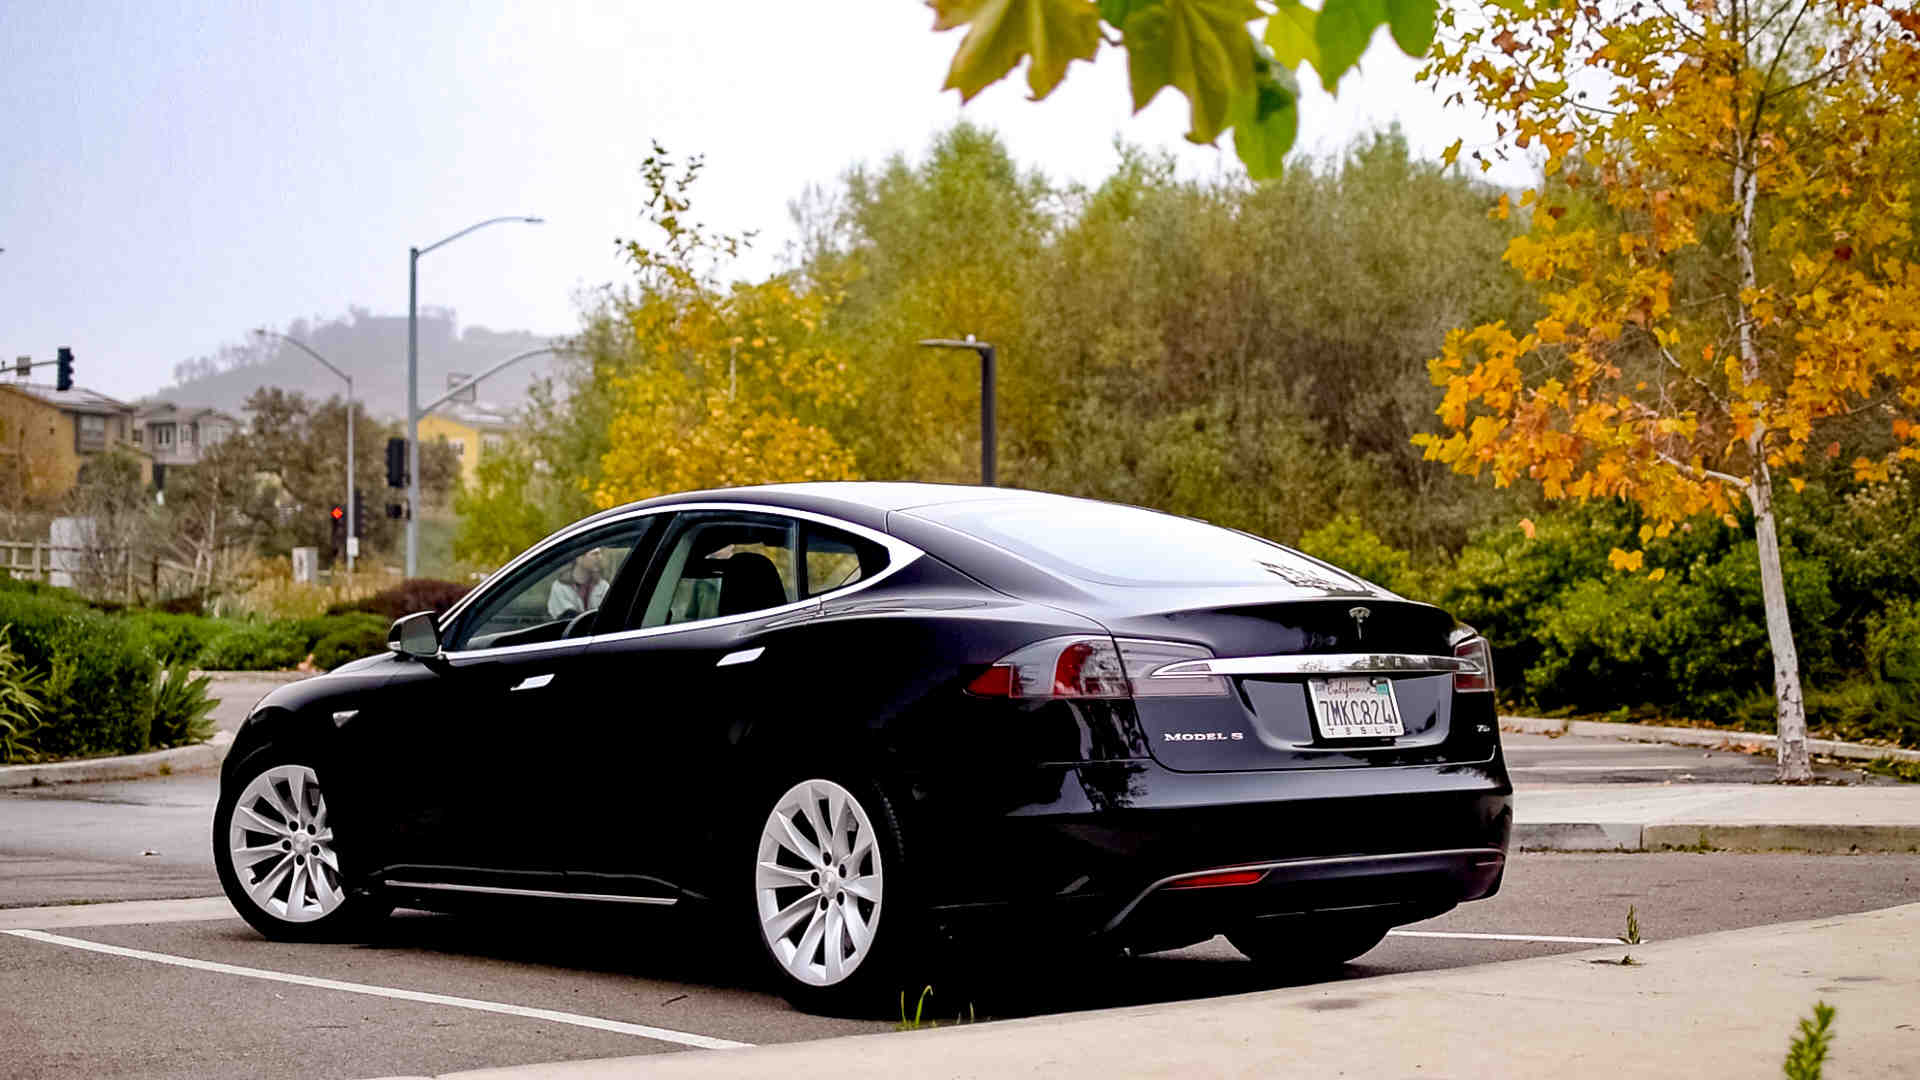 How long can a Tesla sit without charging?